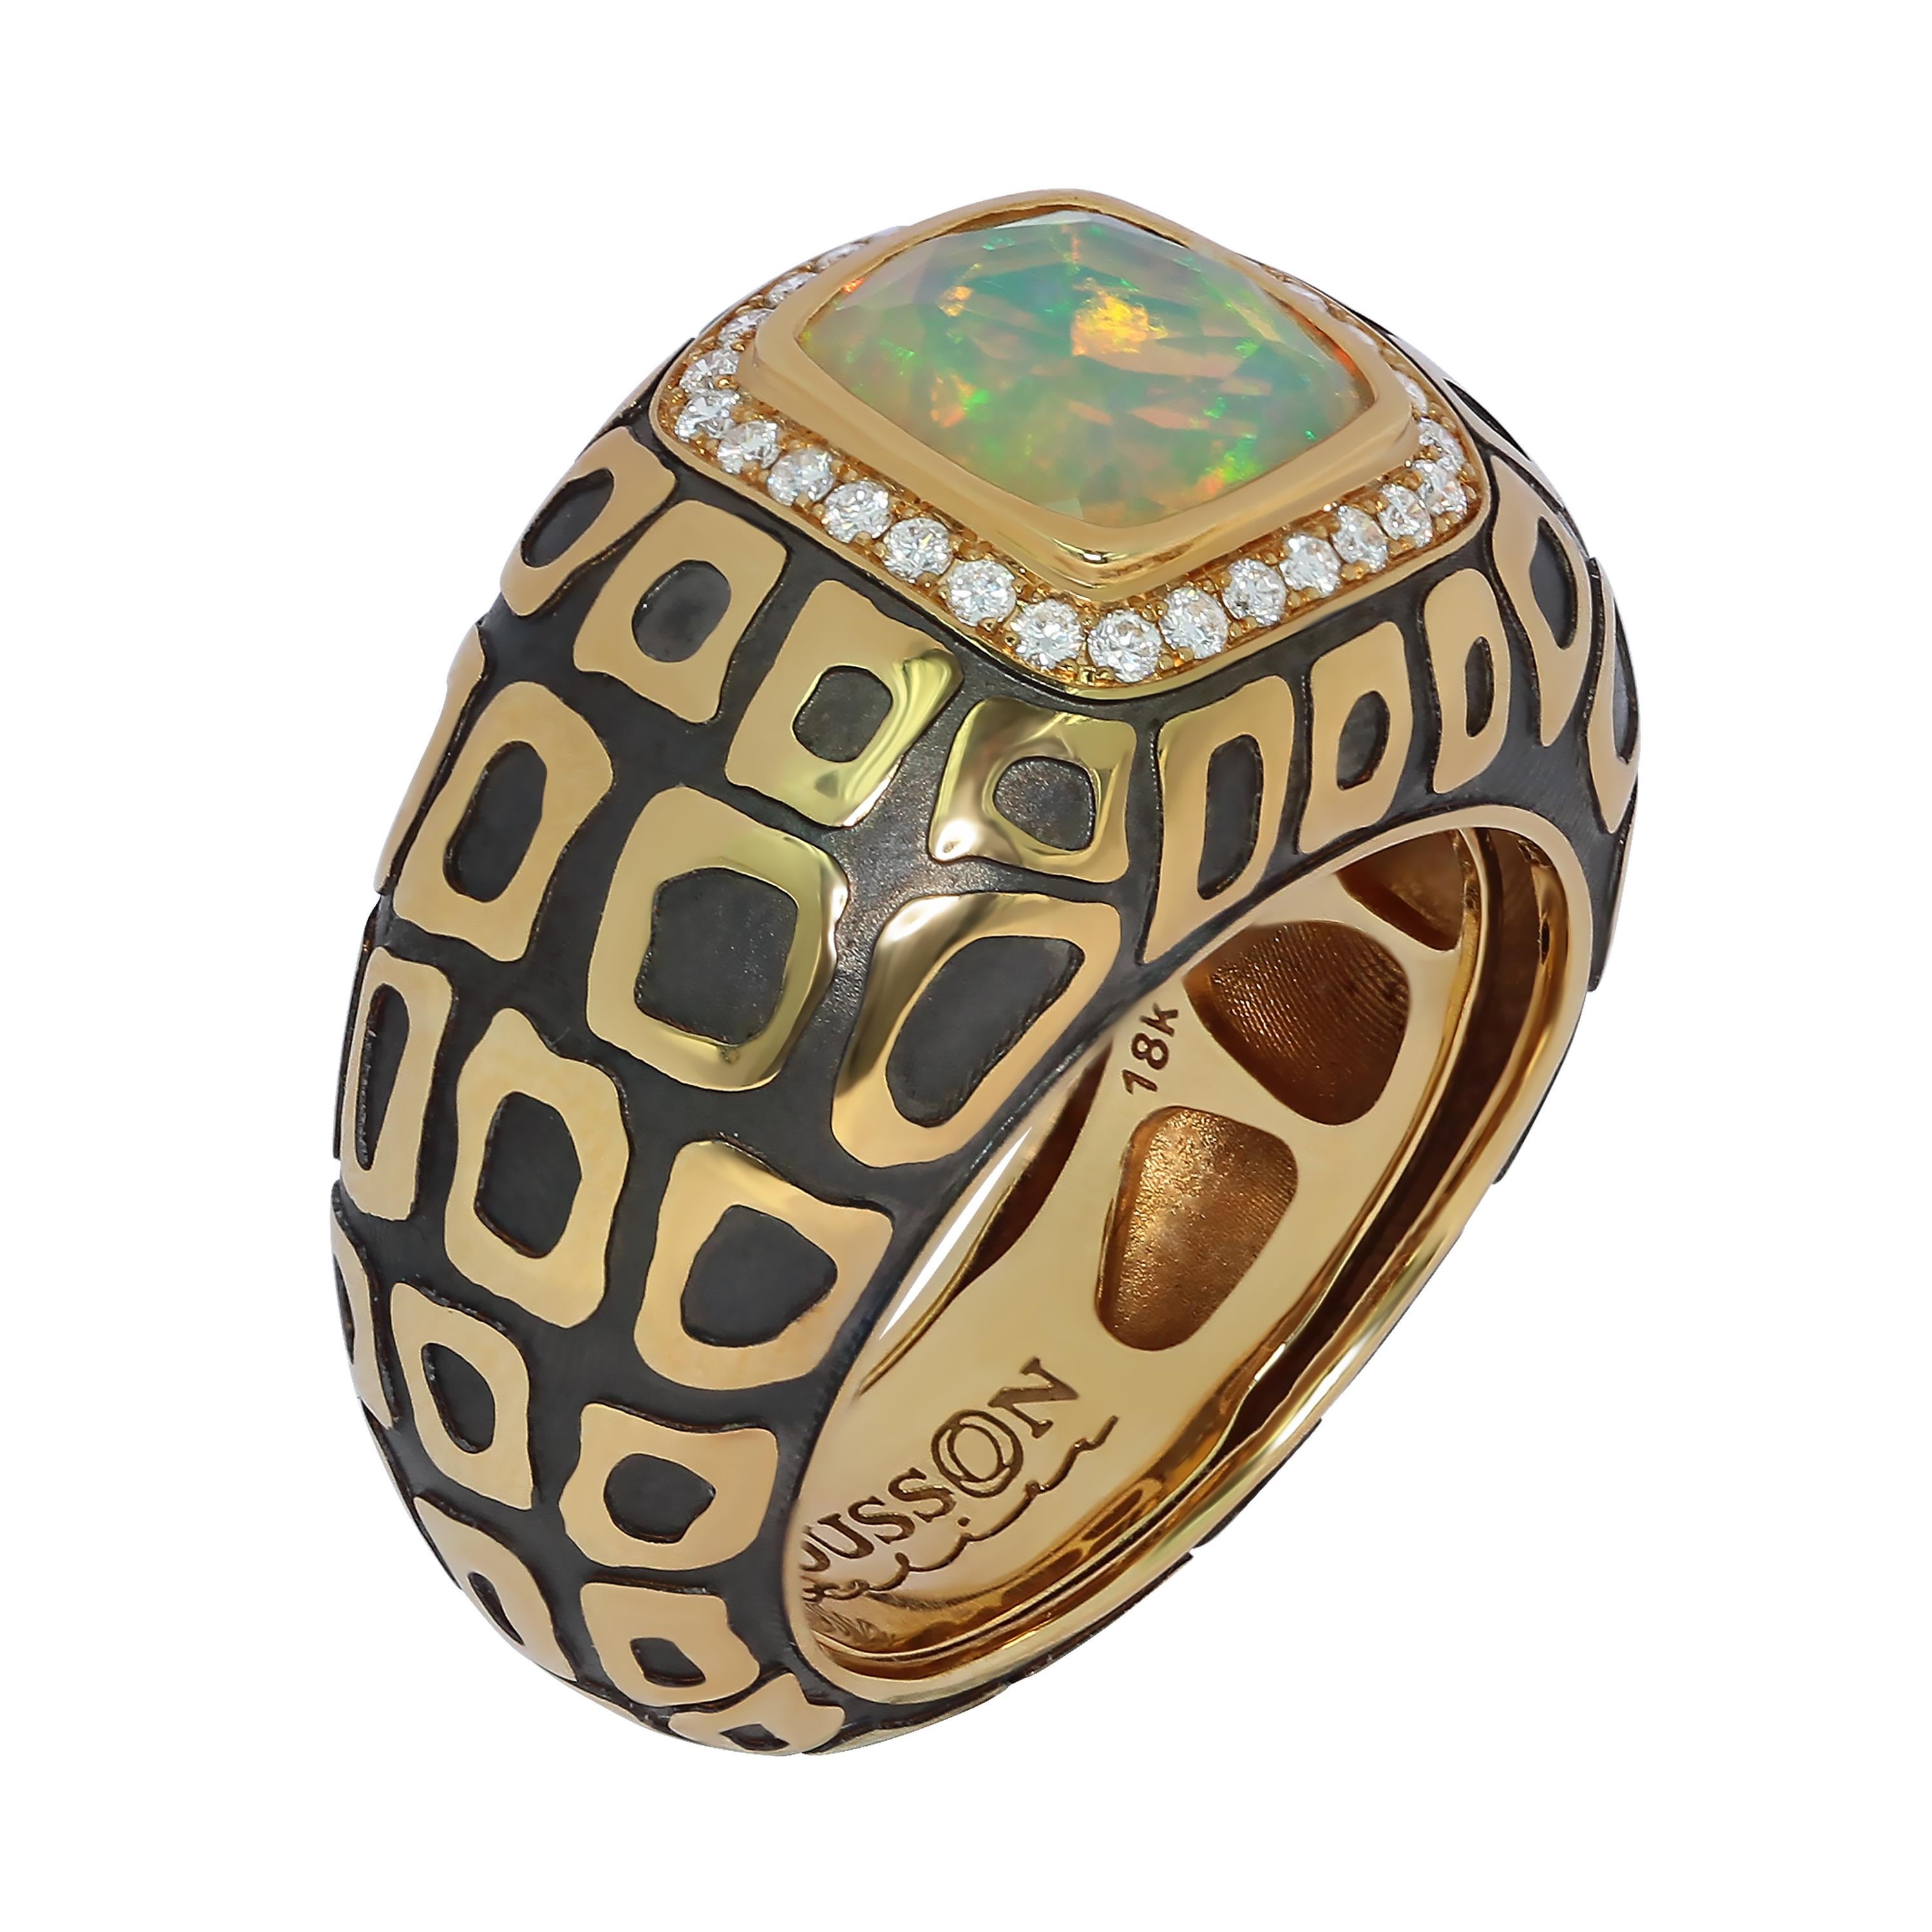 Ethiopian Opal 1.27 Carat Diamonds 18 Karat Yellow and Black Gold Ring
Looking at the opals, it is impossible to look away. In the case of this Ring as well. The combination of orange, green, and blue shades of this astounding 1.27 Carat Ethiopian